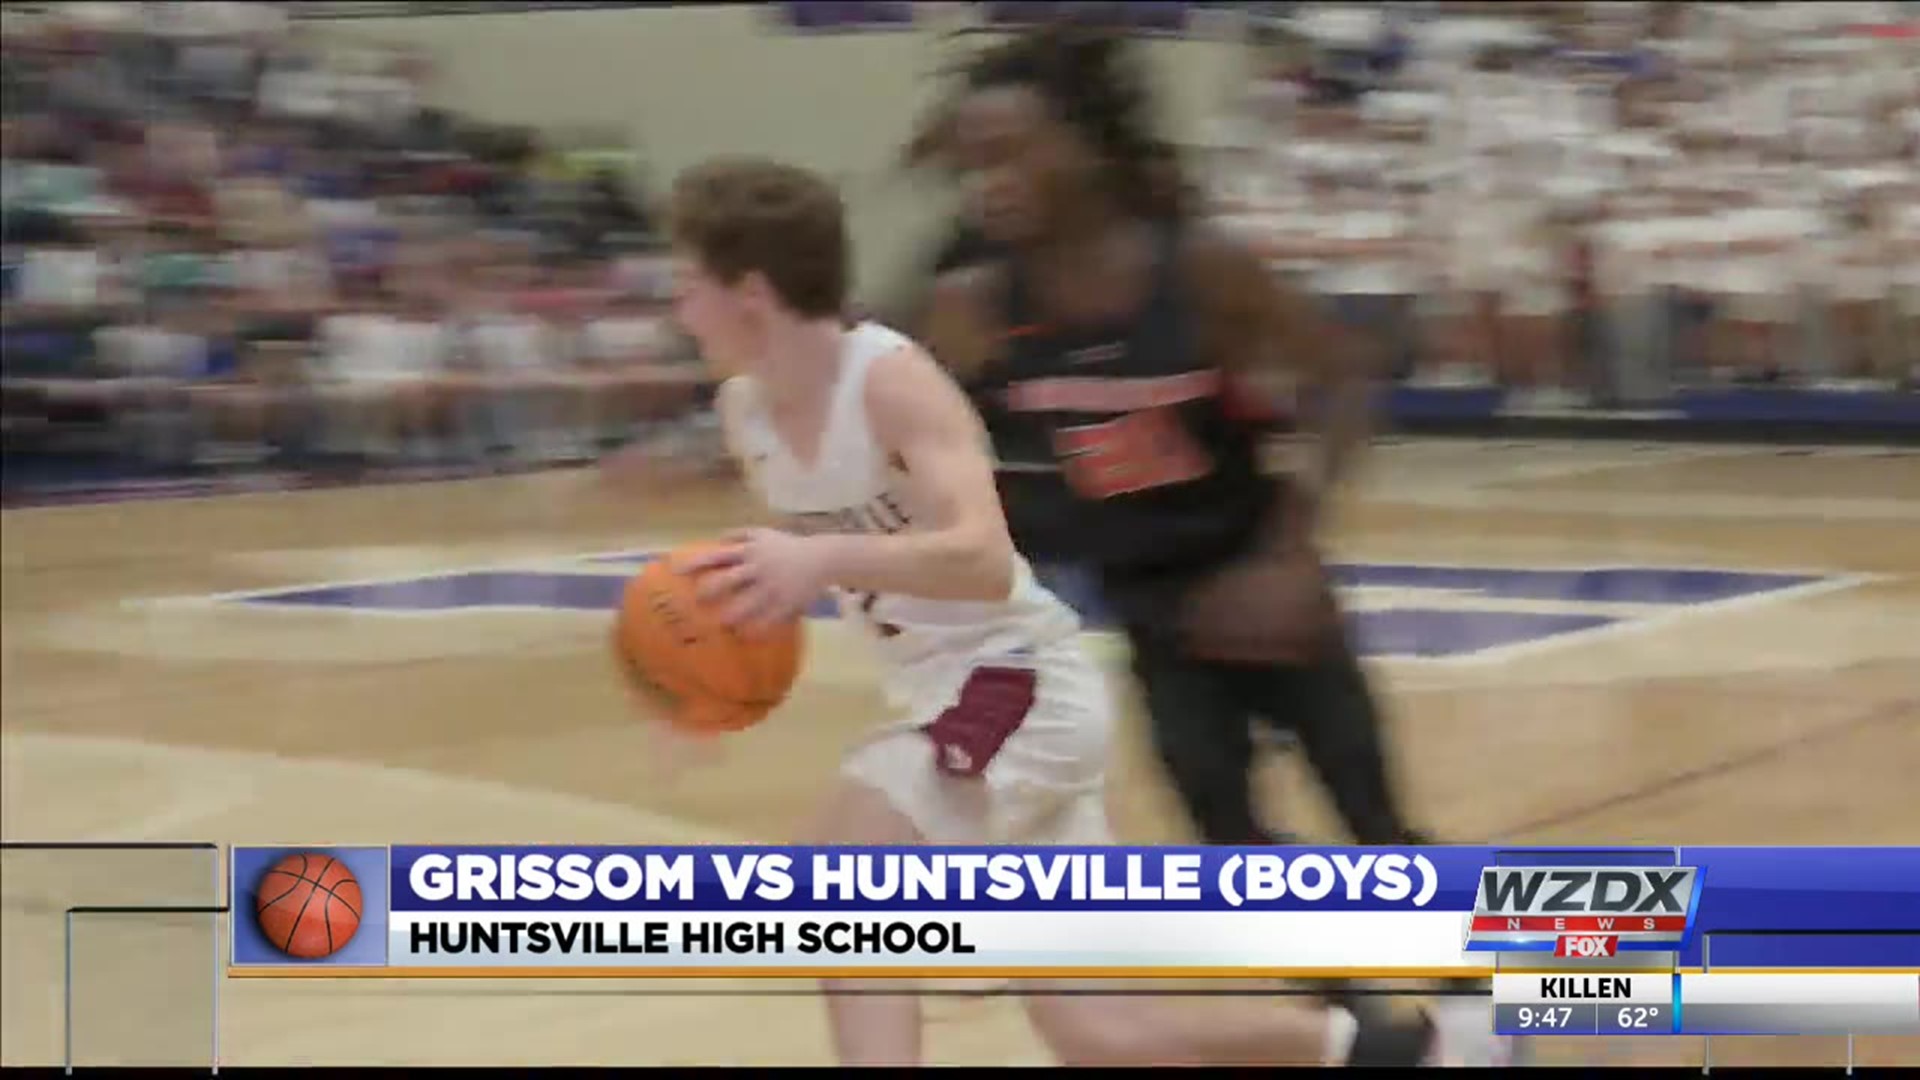 Huntsville takes down Grissom at home. Boys win 44-32, and girls win 47-17.